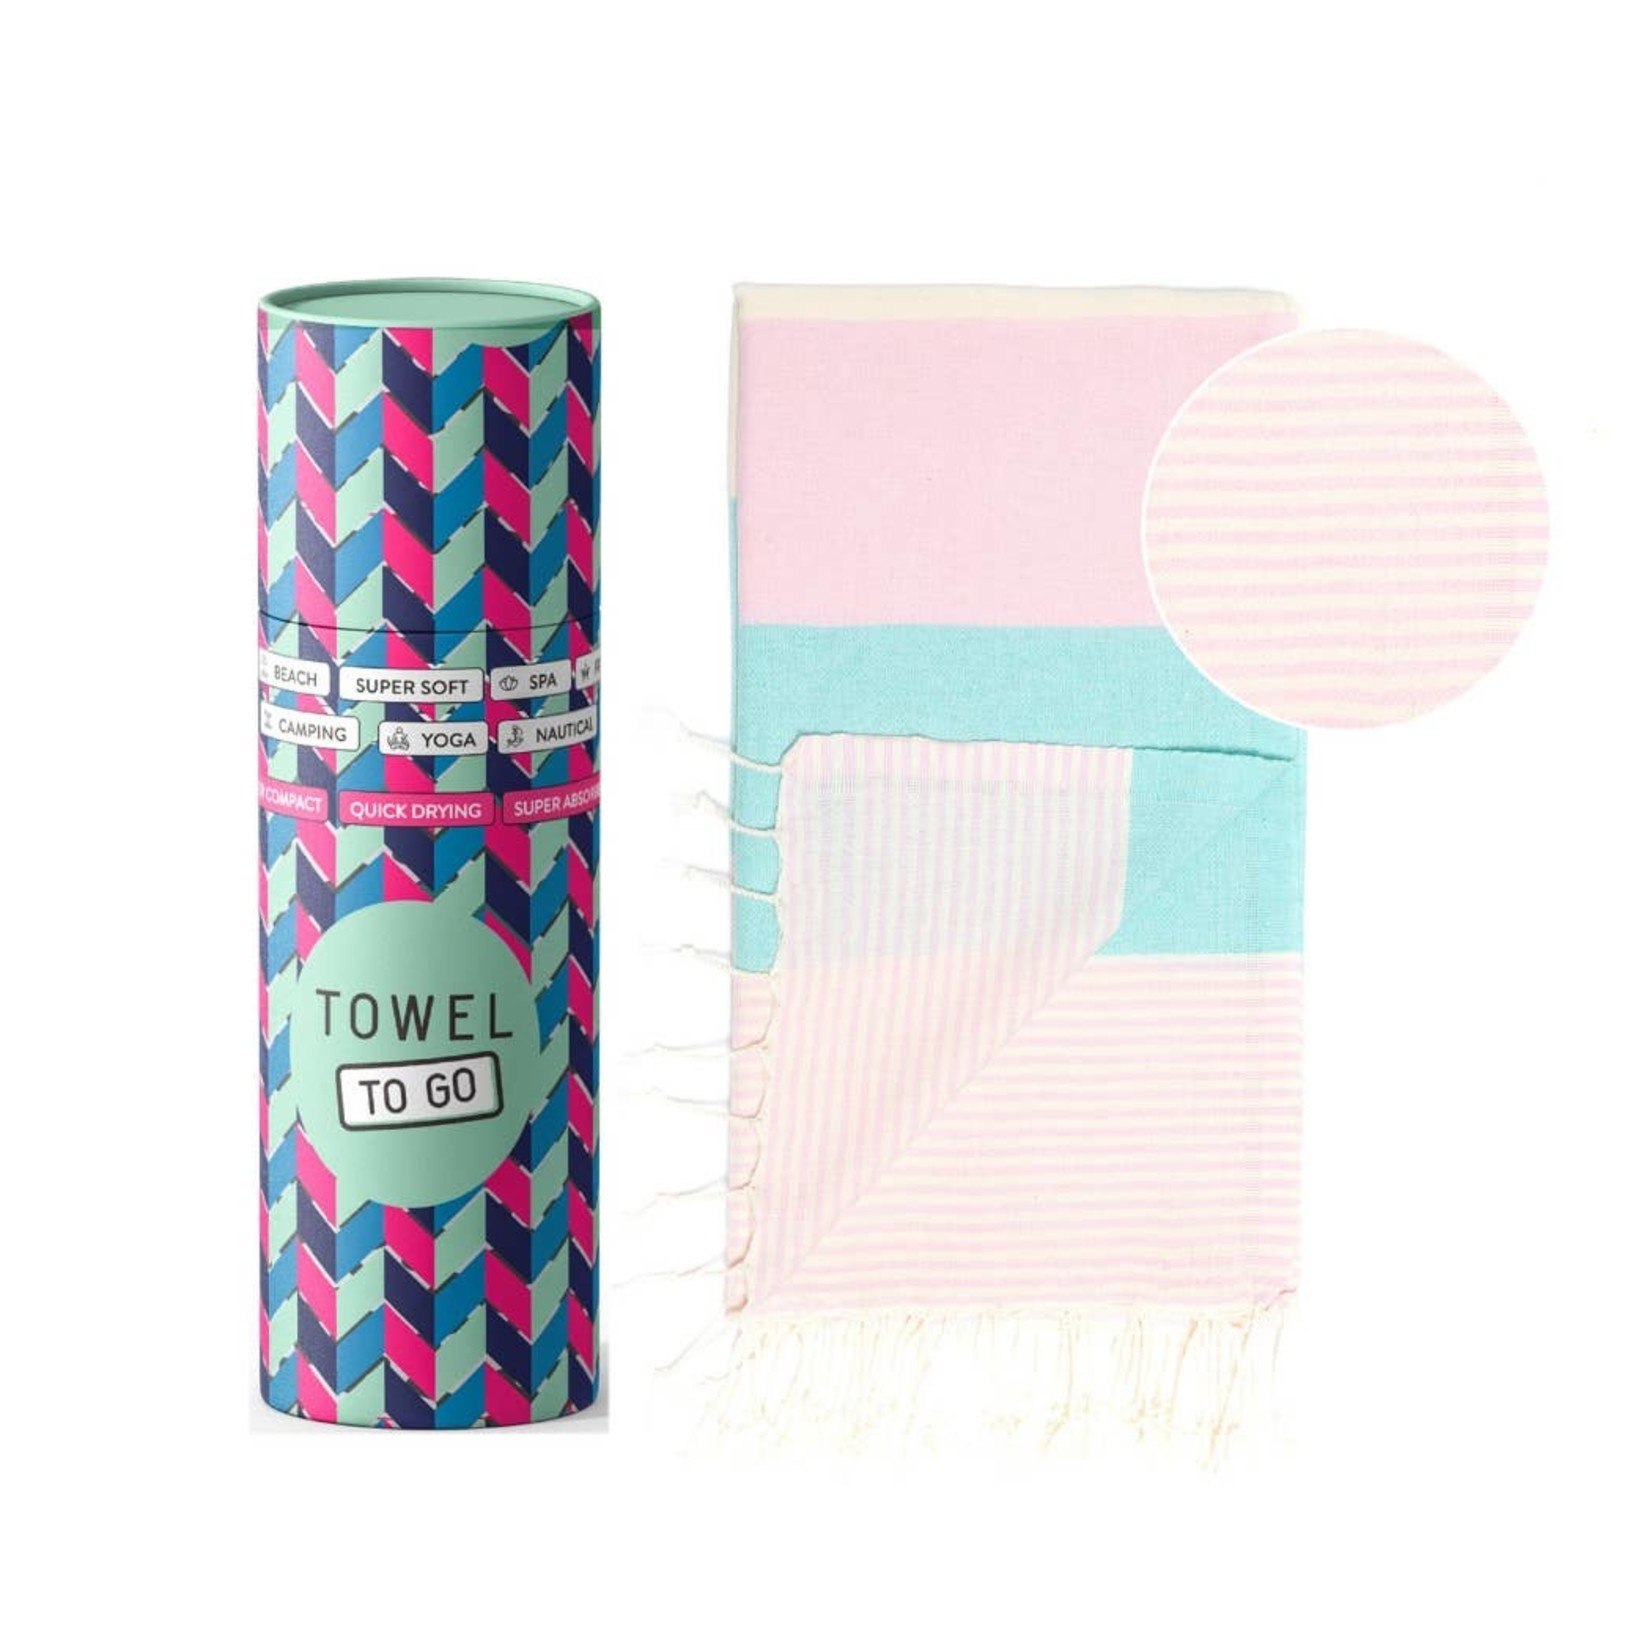 TOWEL TO GO Hamamtuch Palermo türkis - rosa